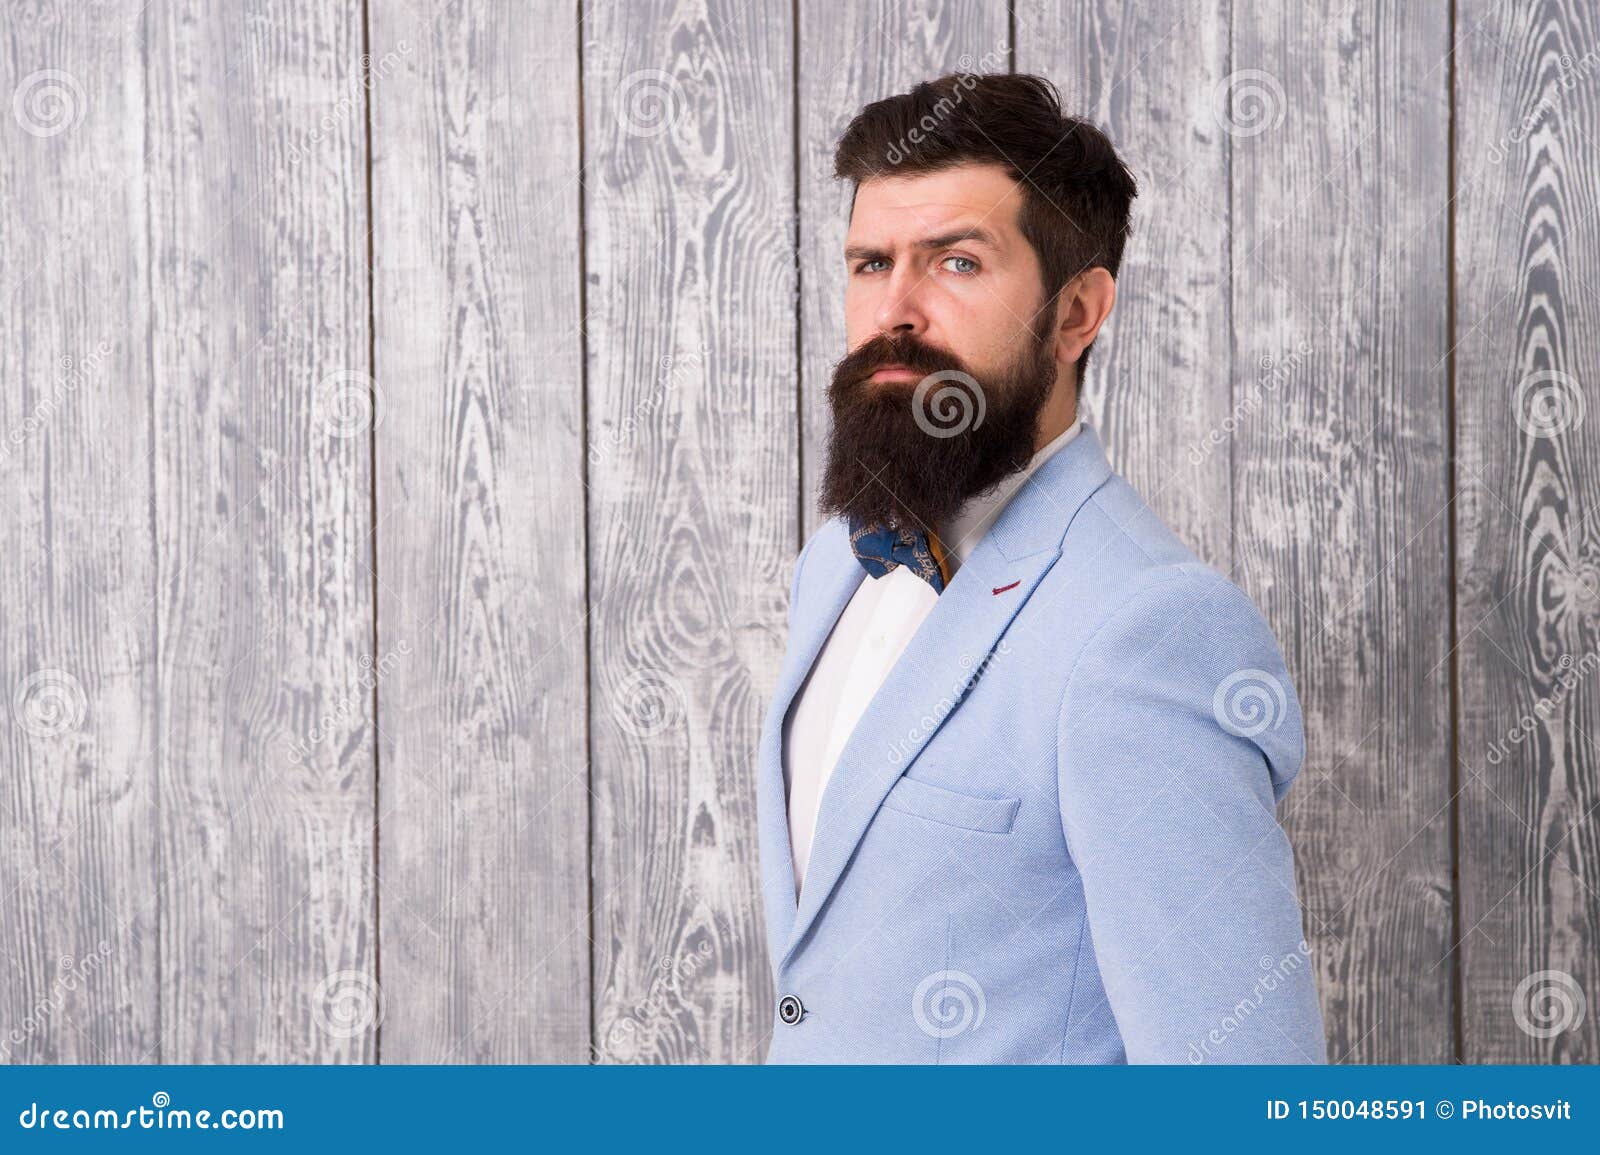 Romantic Wedding Outfit. Gentleman Style Barber. Barber Shop Concept. Beard  and Mustache Stock Image - Image of attractive, party: 150048591